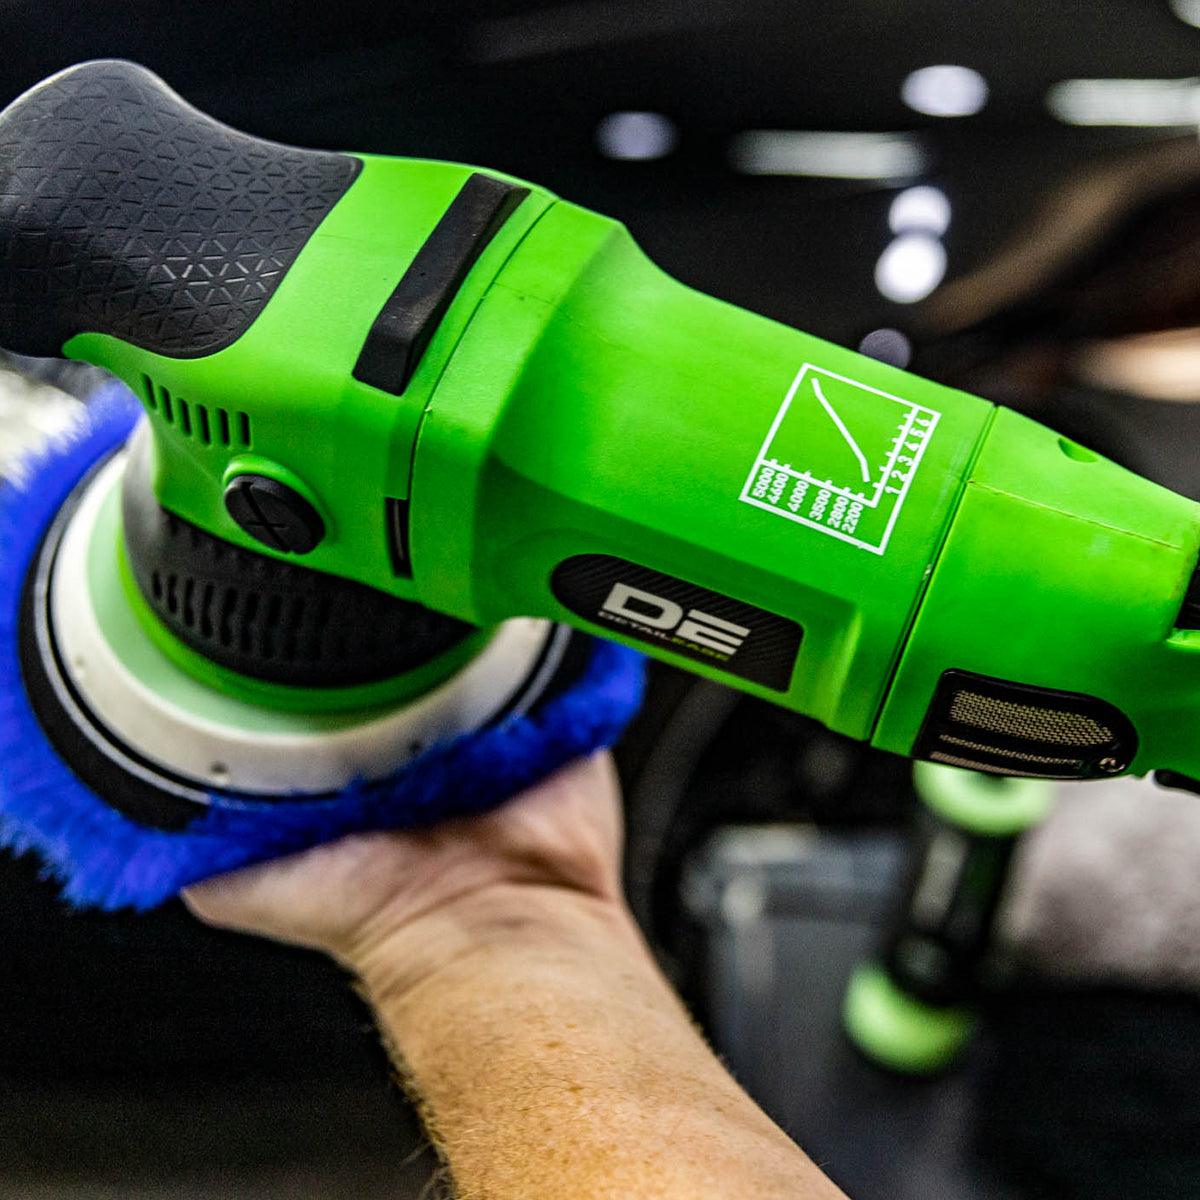 The Pro15 - 1000W Dual Action Polisher